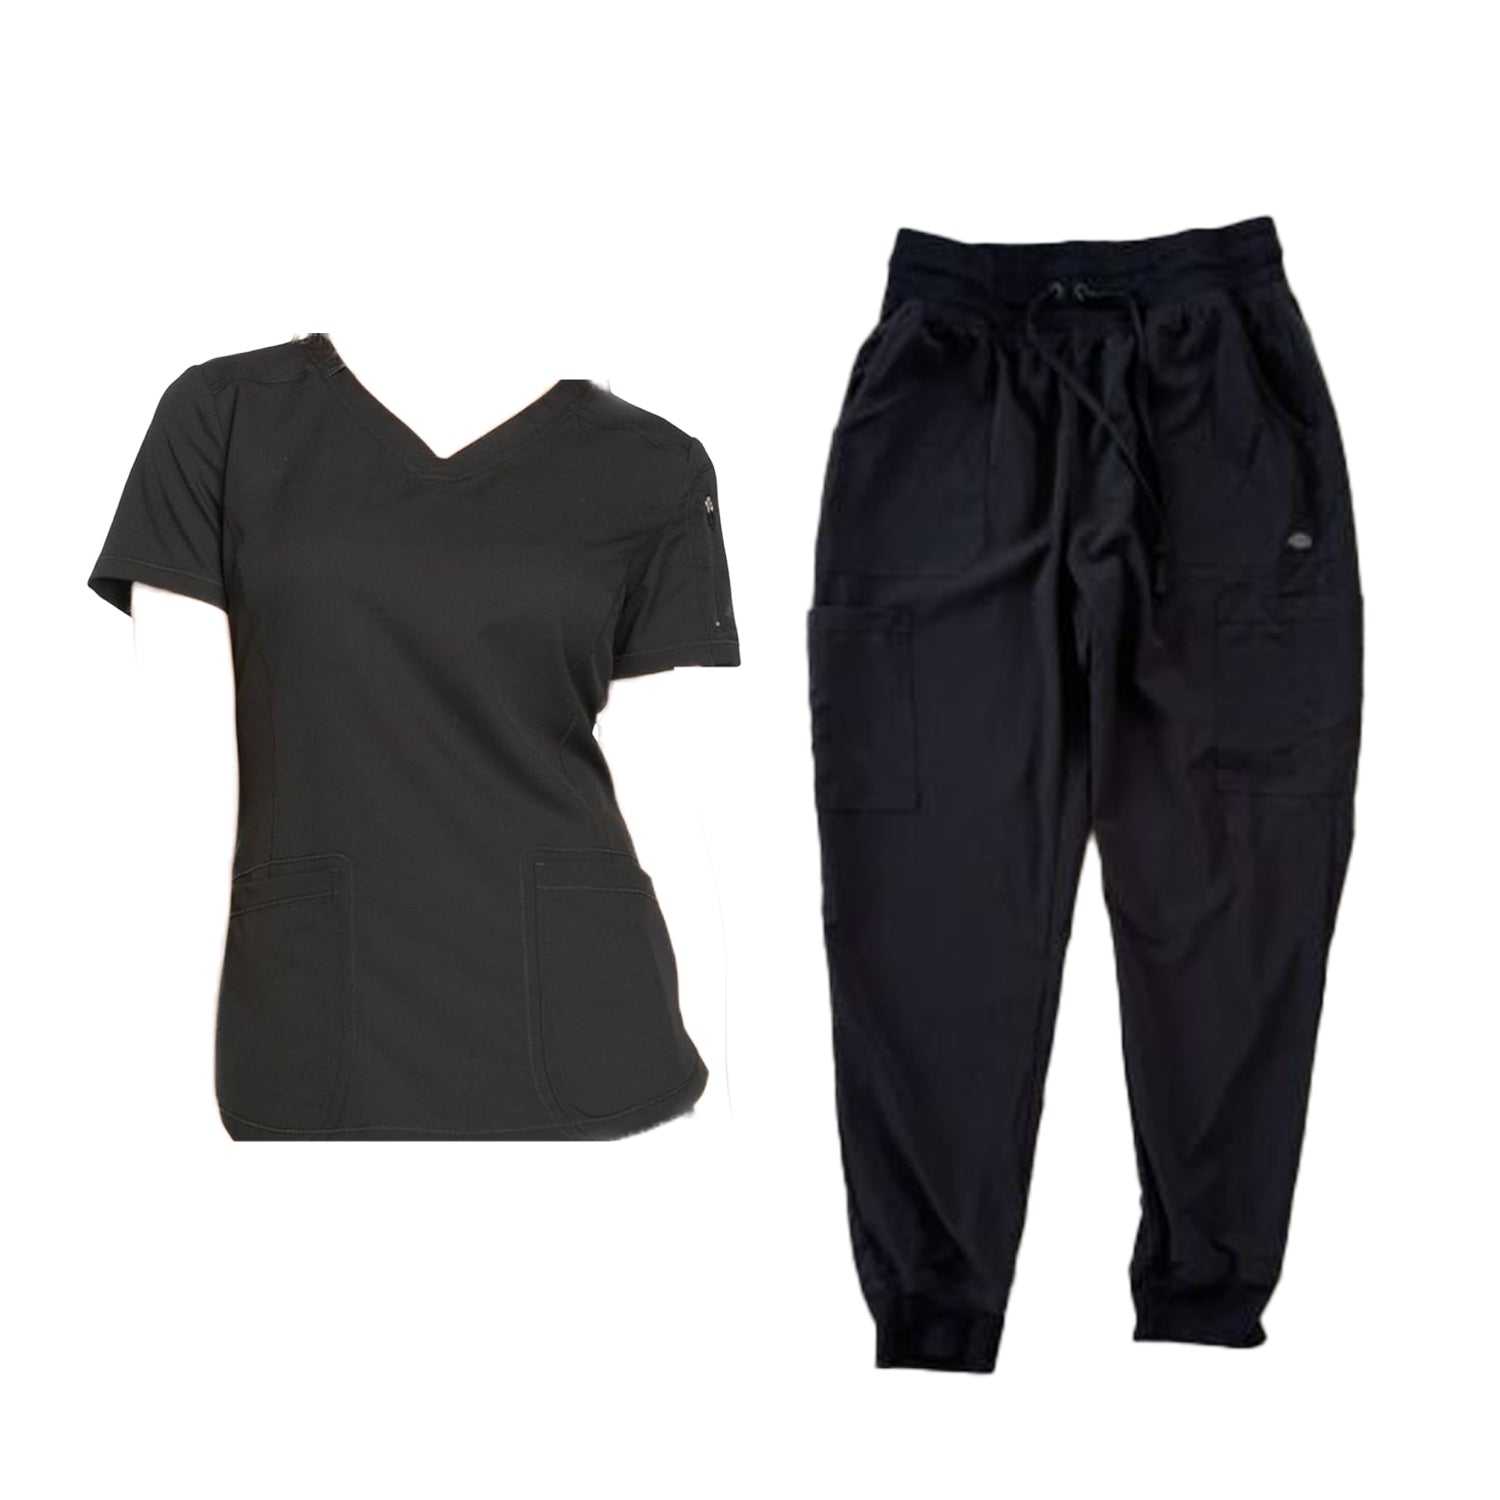 Dickies Jogger Scrubs For Women Set with V-Neck Top and Drawstring